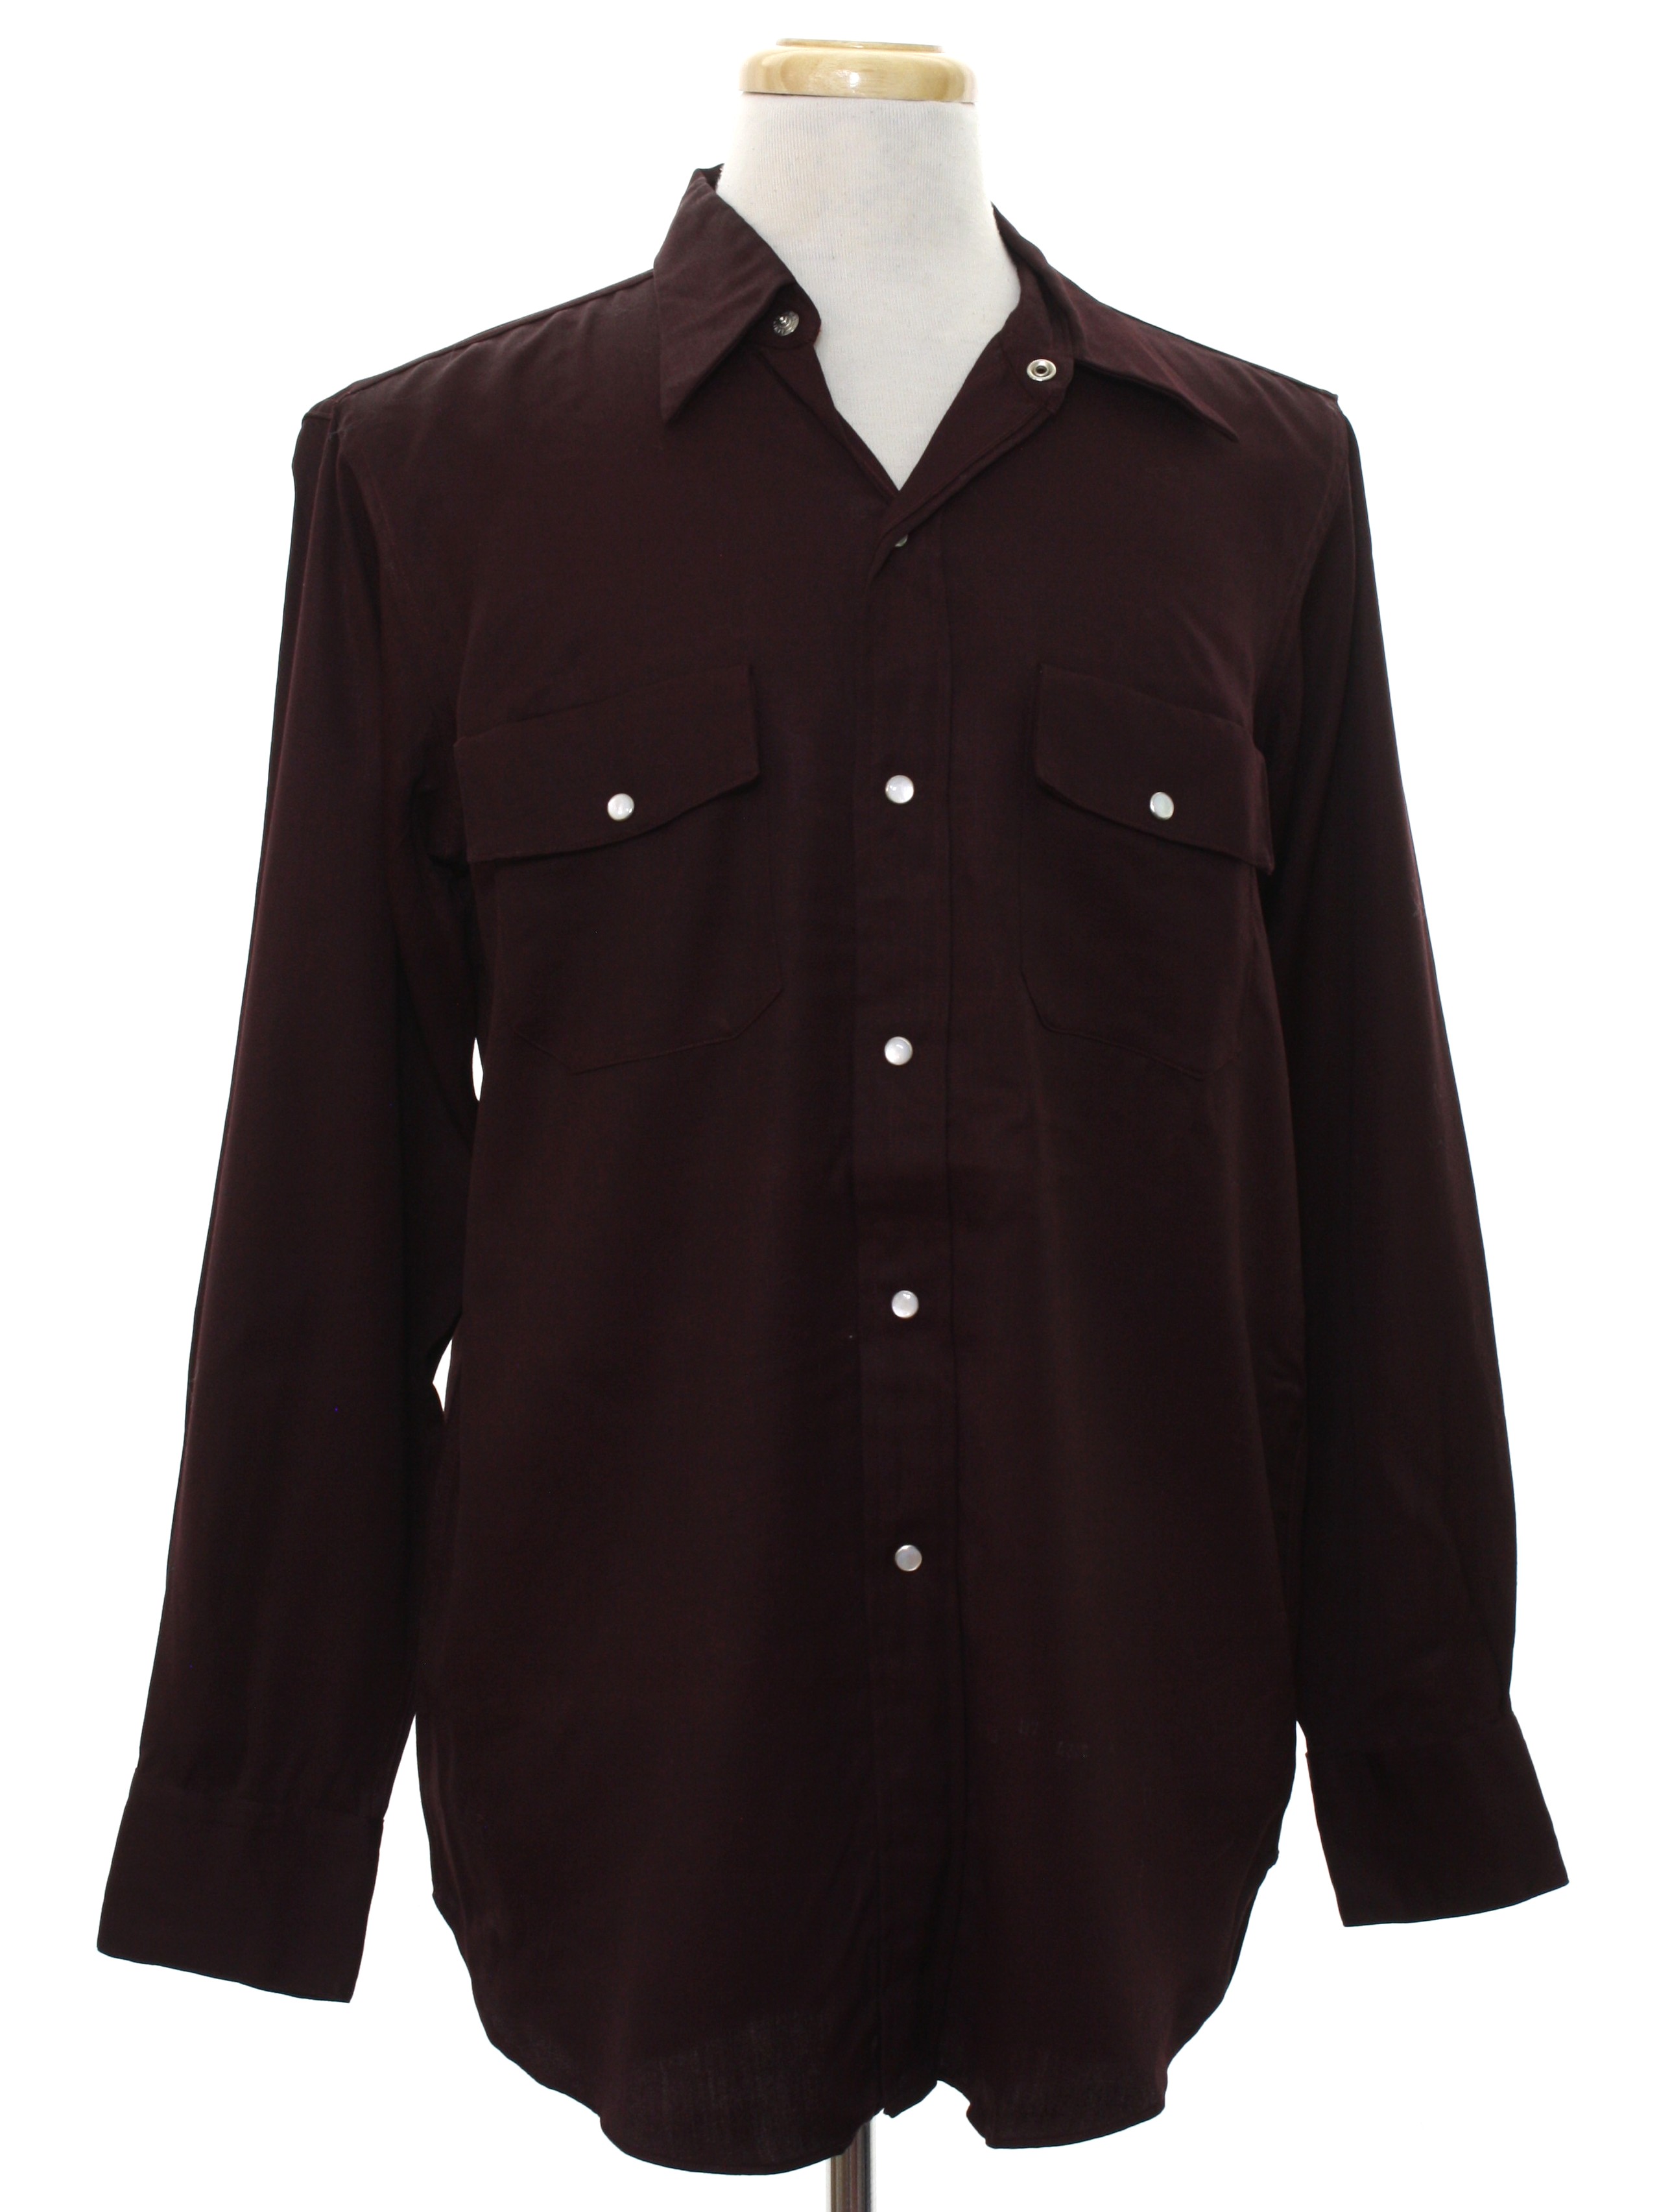 1940's Western Shirt: Late 40s or Early 50s -Daily Double styled in ...